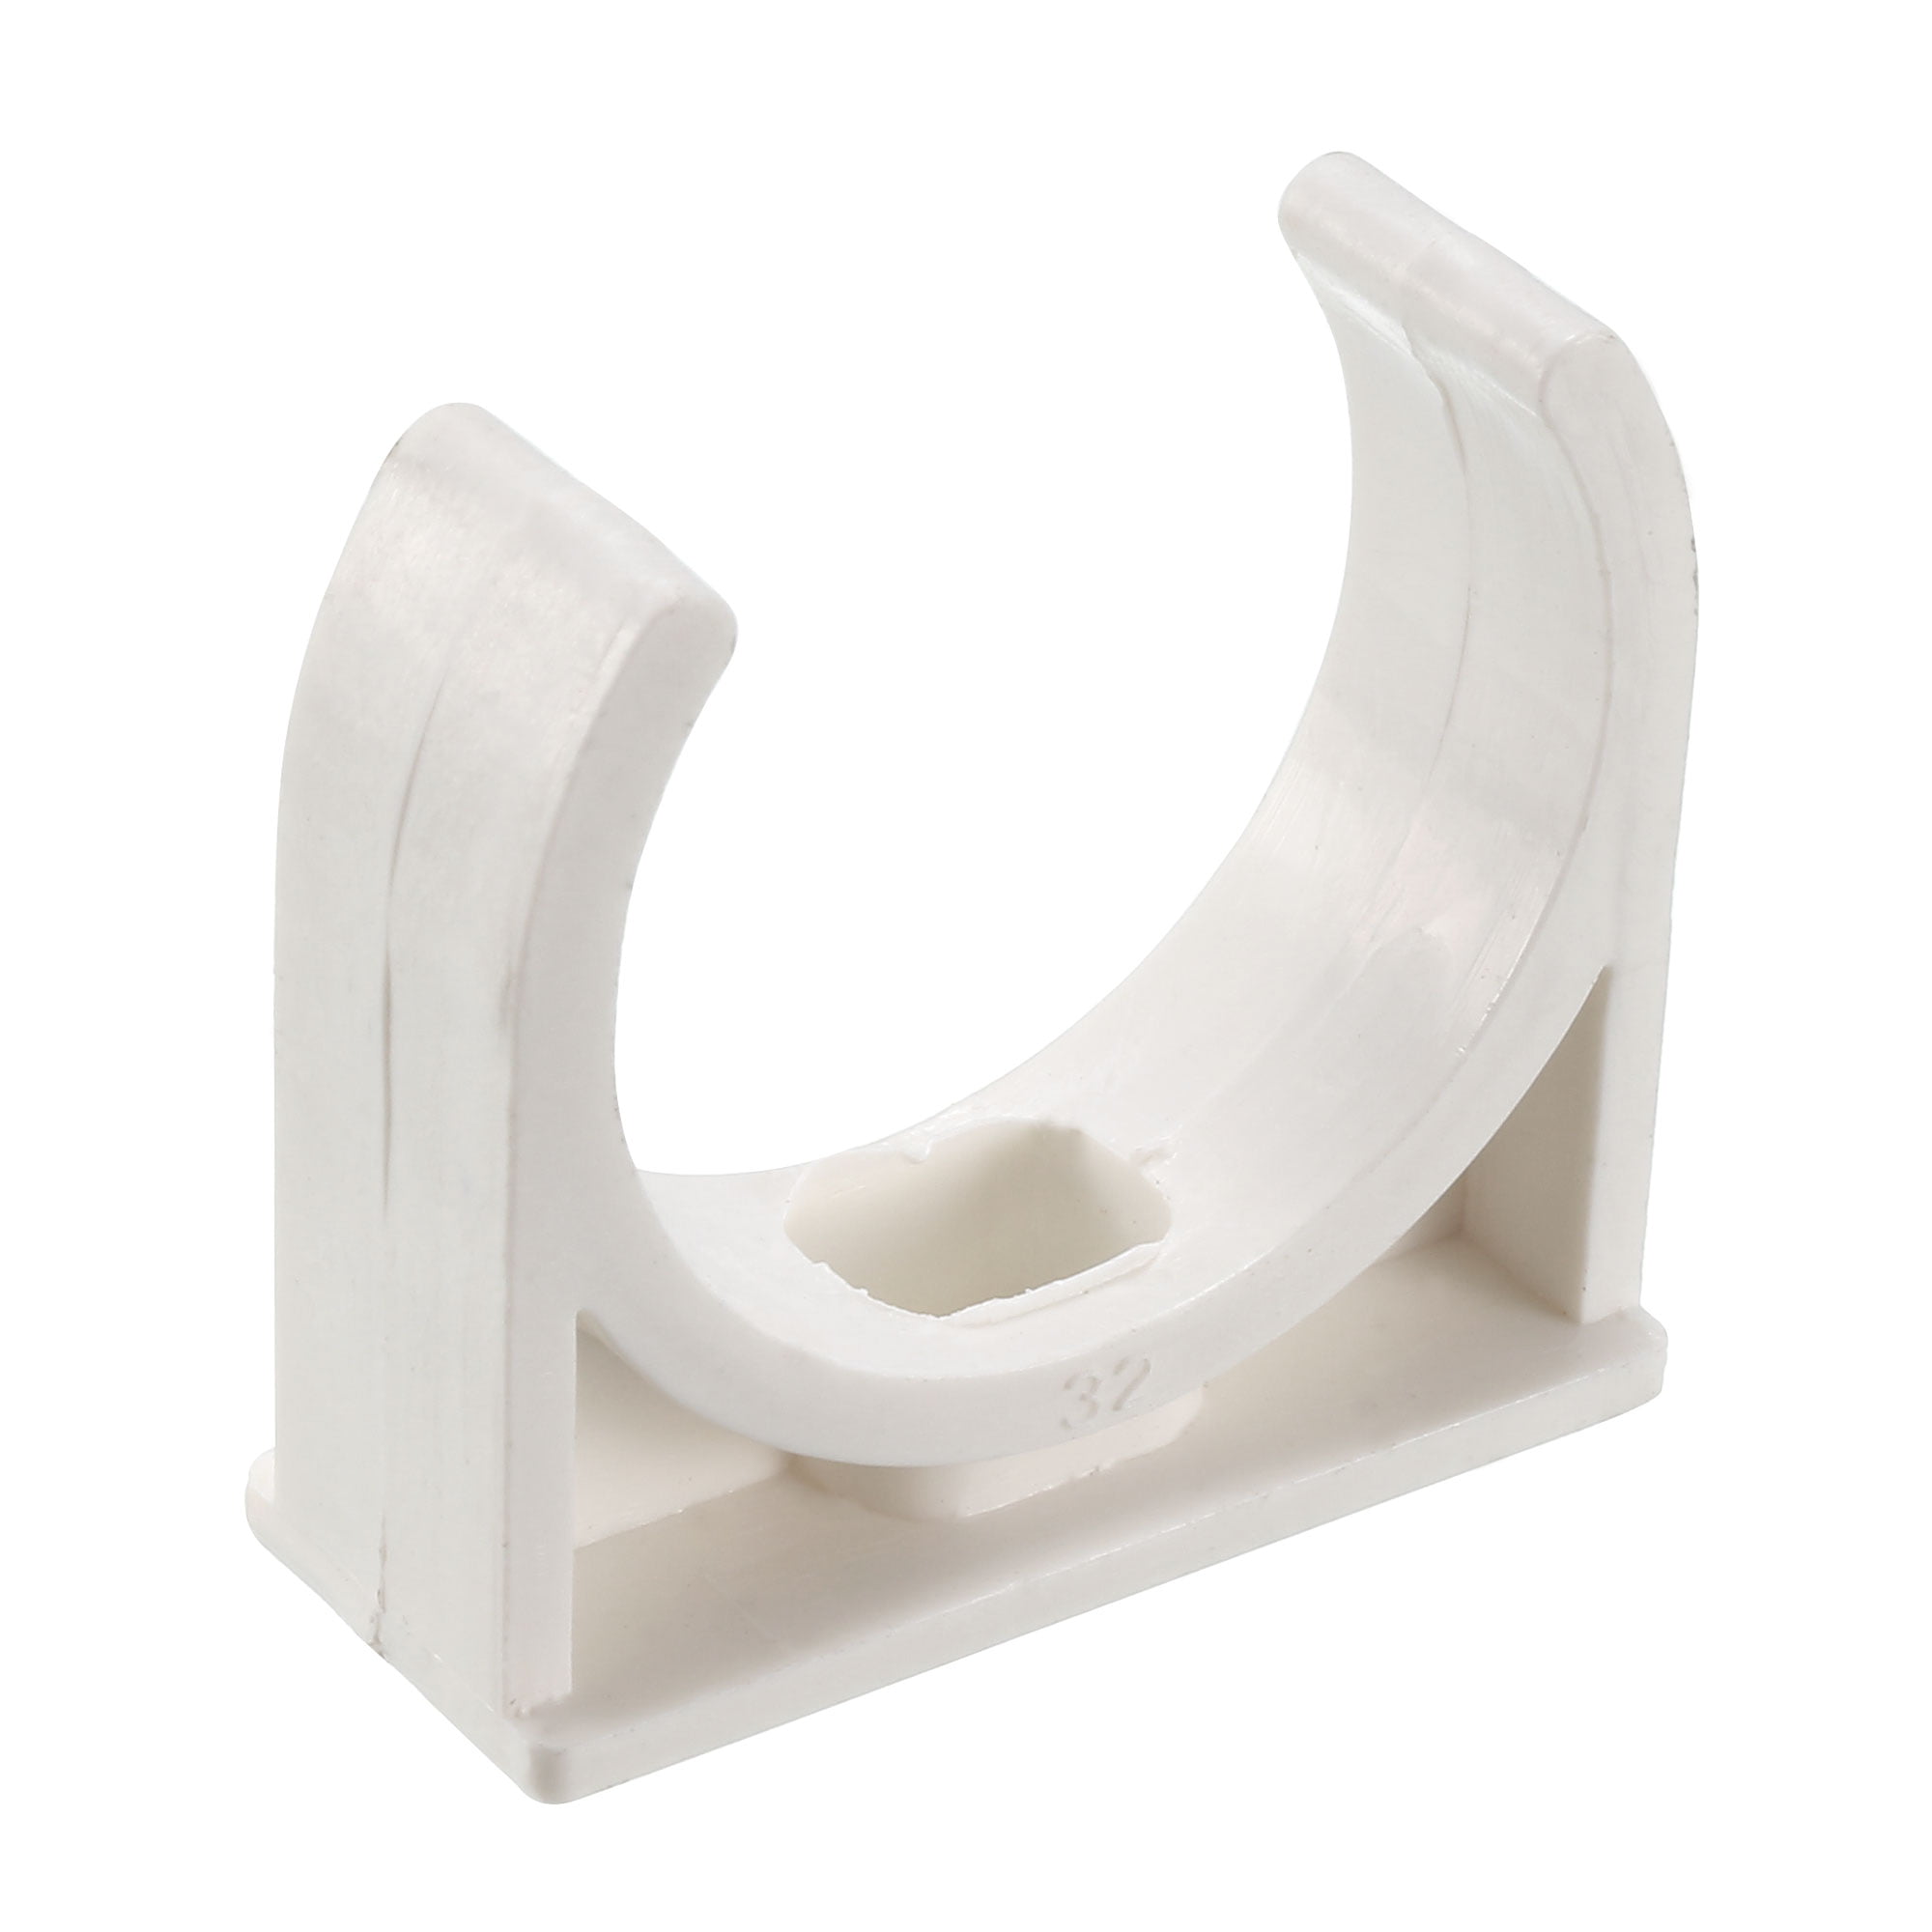 PVC Water Supply Pipe Clamp Clips, Fit for 32mm/1-1/4